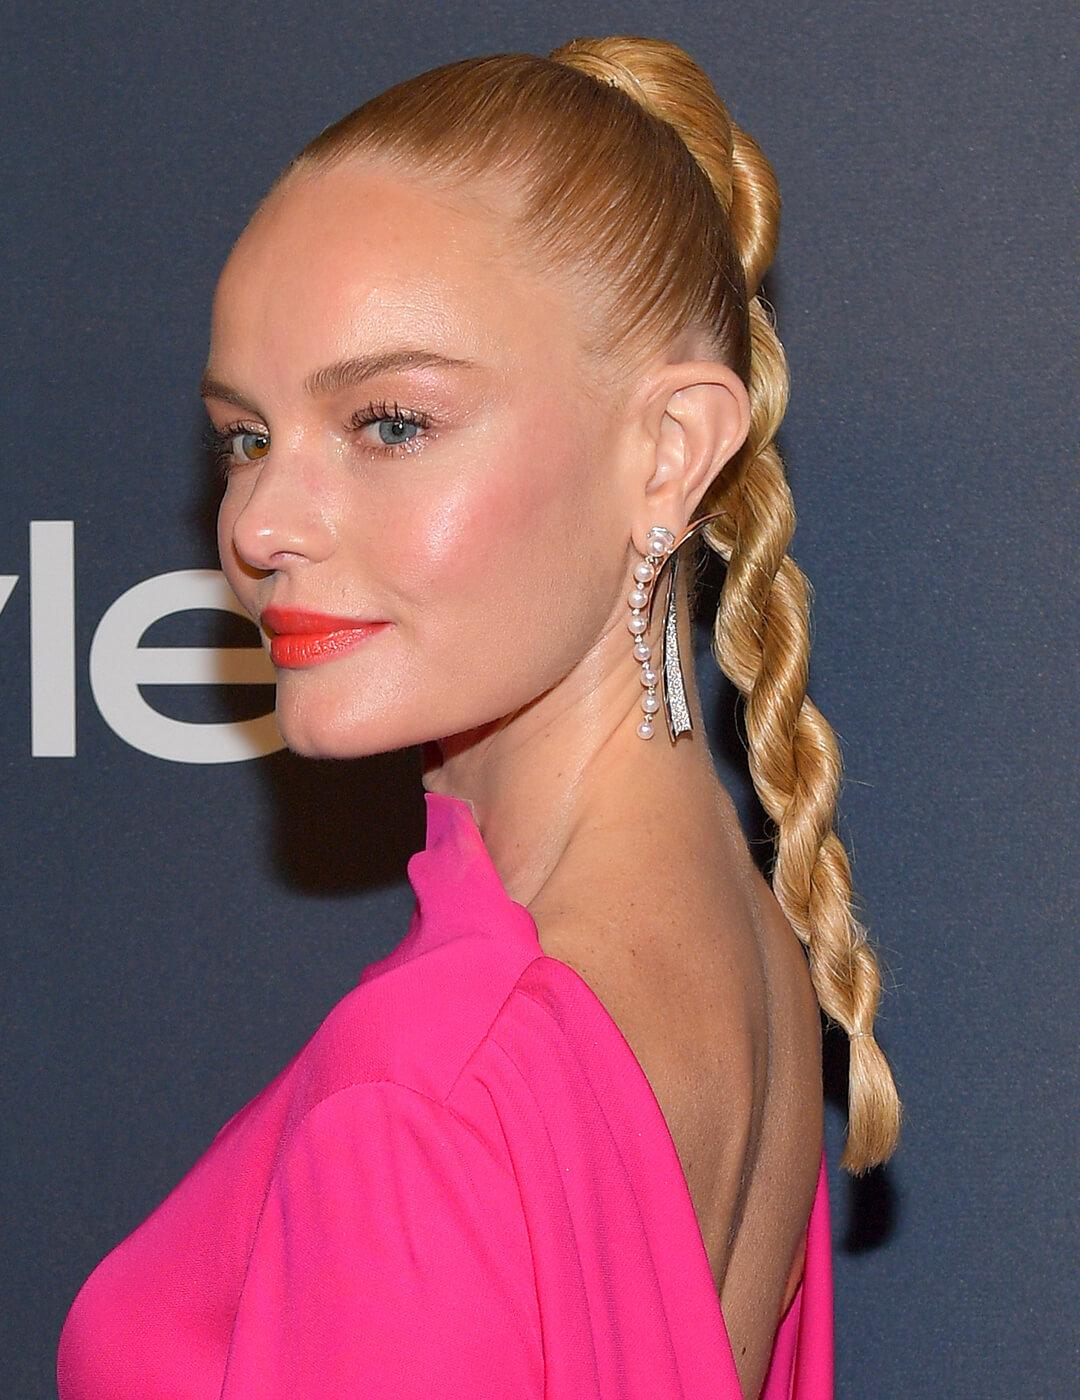 Kate Bosworth rocking a hot pink dress, minimal makeup look, silver dangling earrings, and twisted braids high ponytail hairstyle